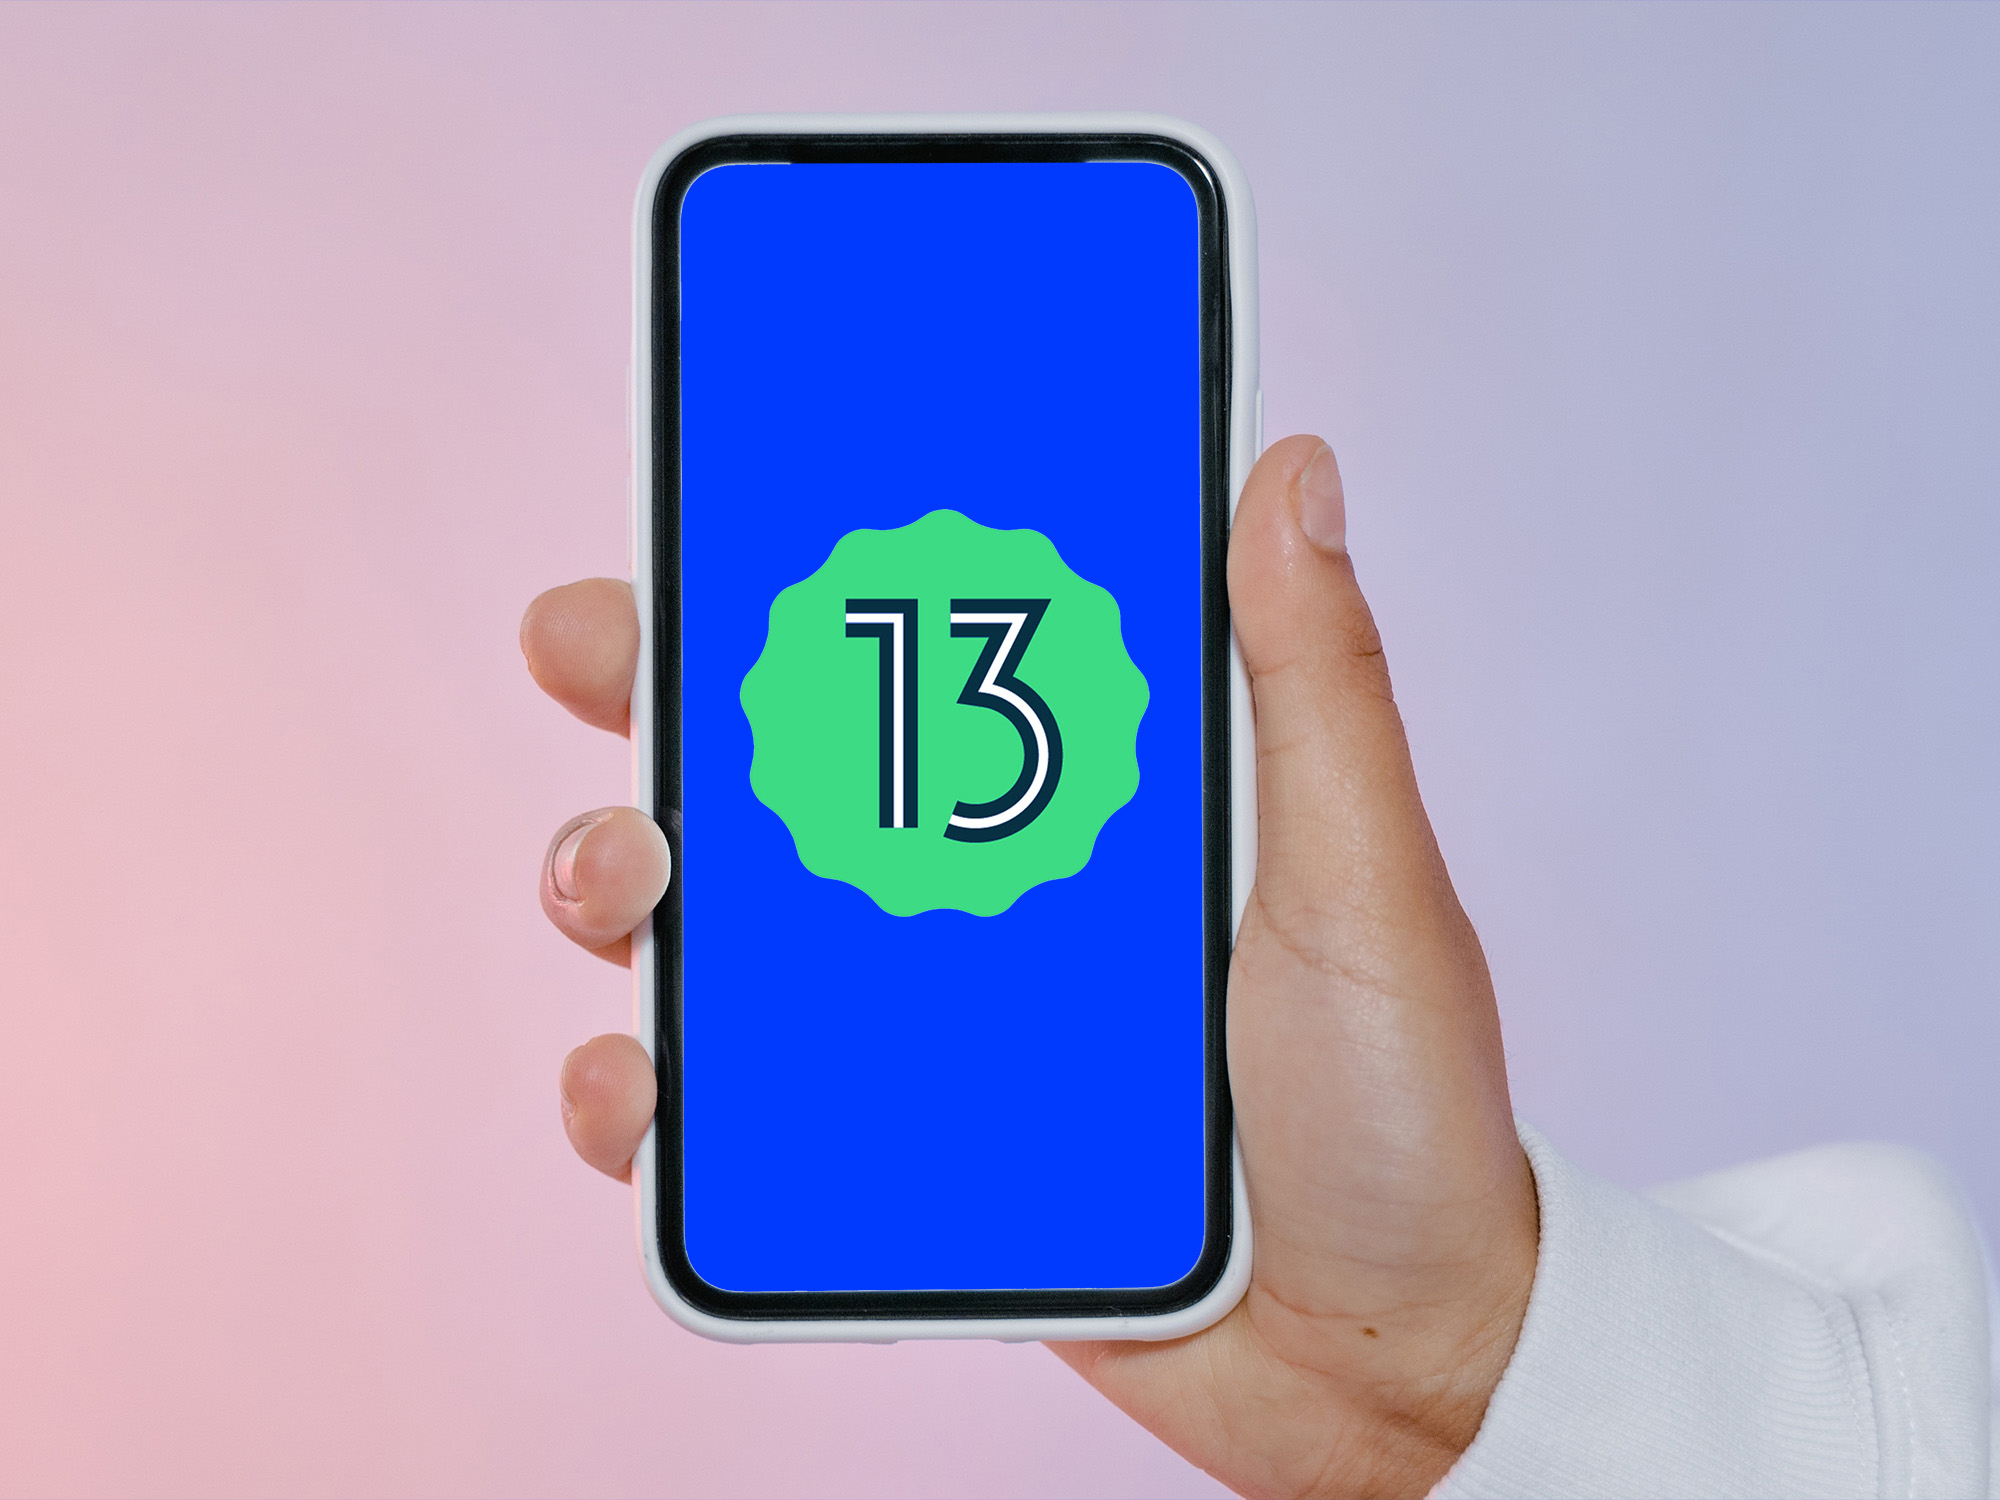 How to test drive Android 13 before its release